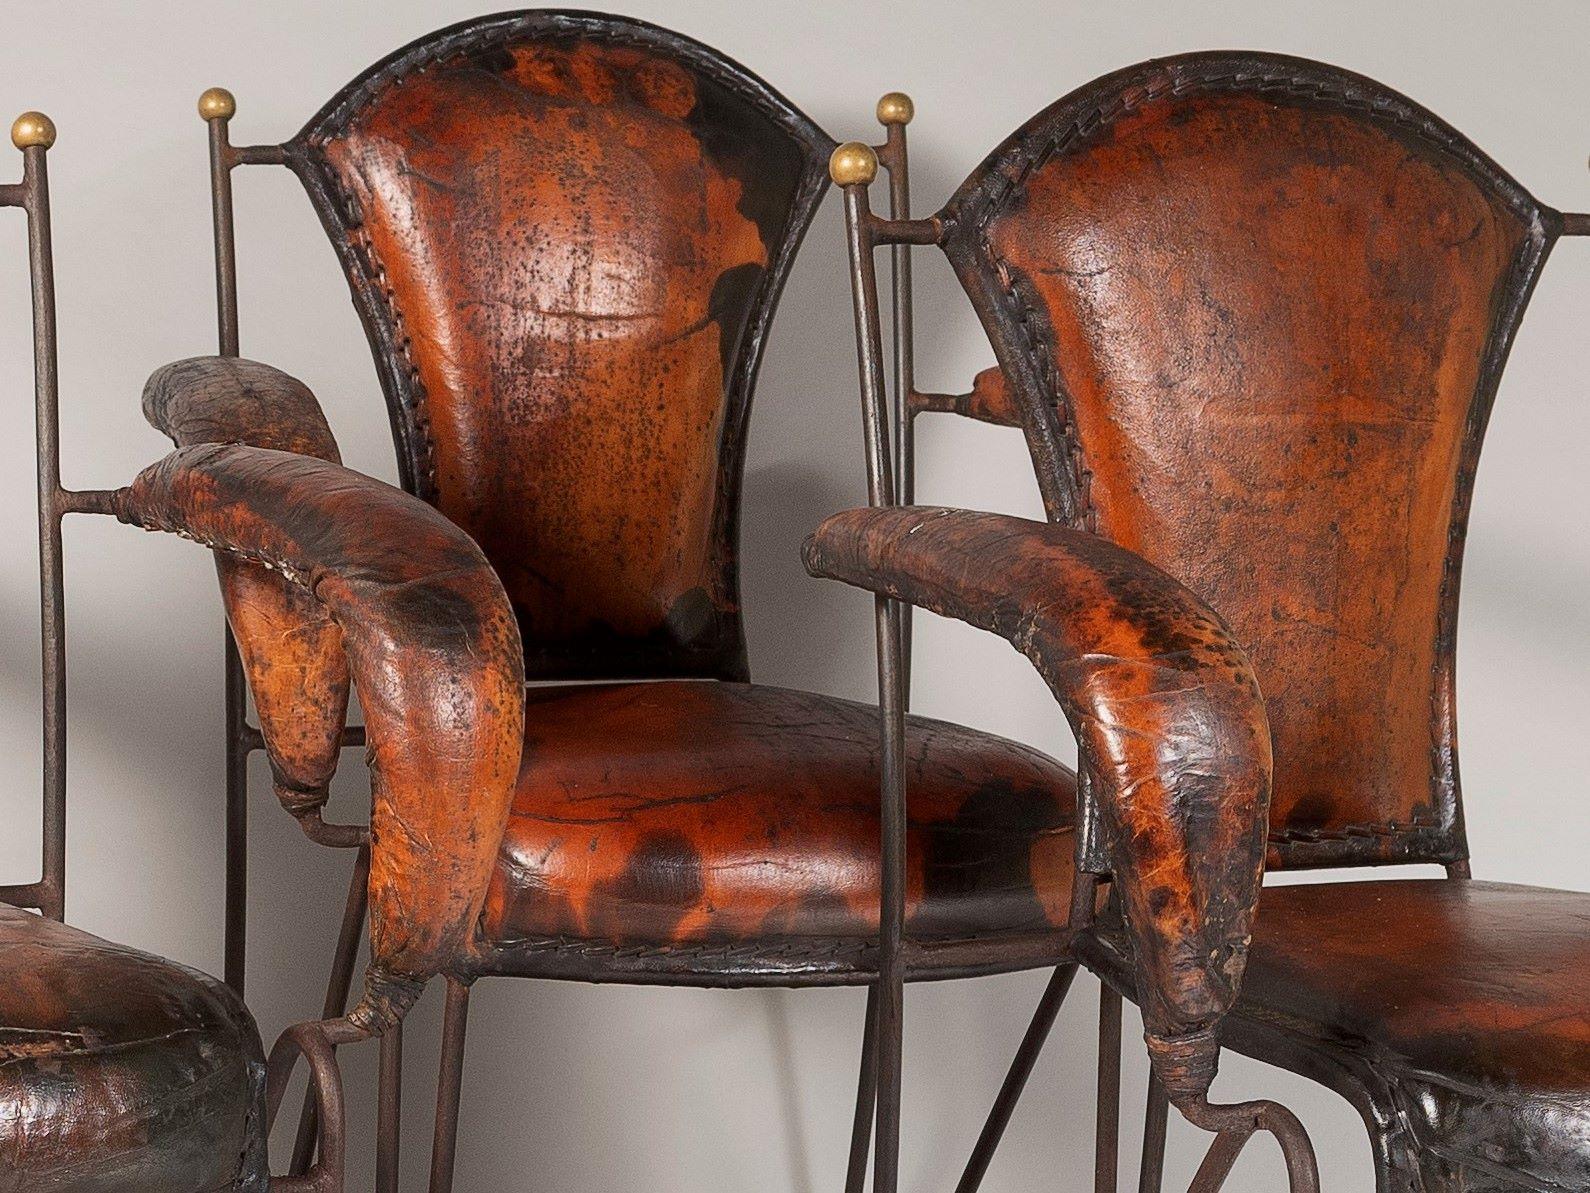 French 1950s Jacques Adnet Hand Stitched Leather Iron Armchairs - Set of 4 For Sale 4